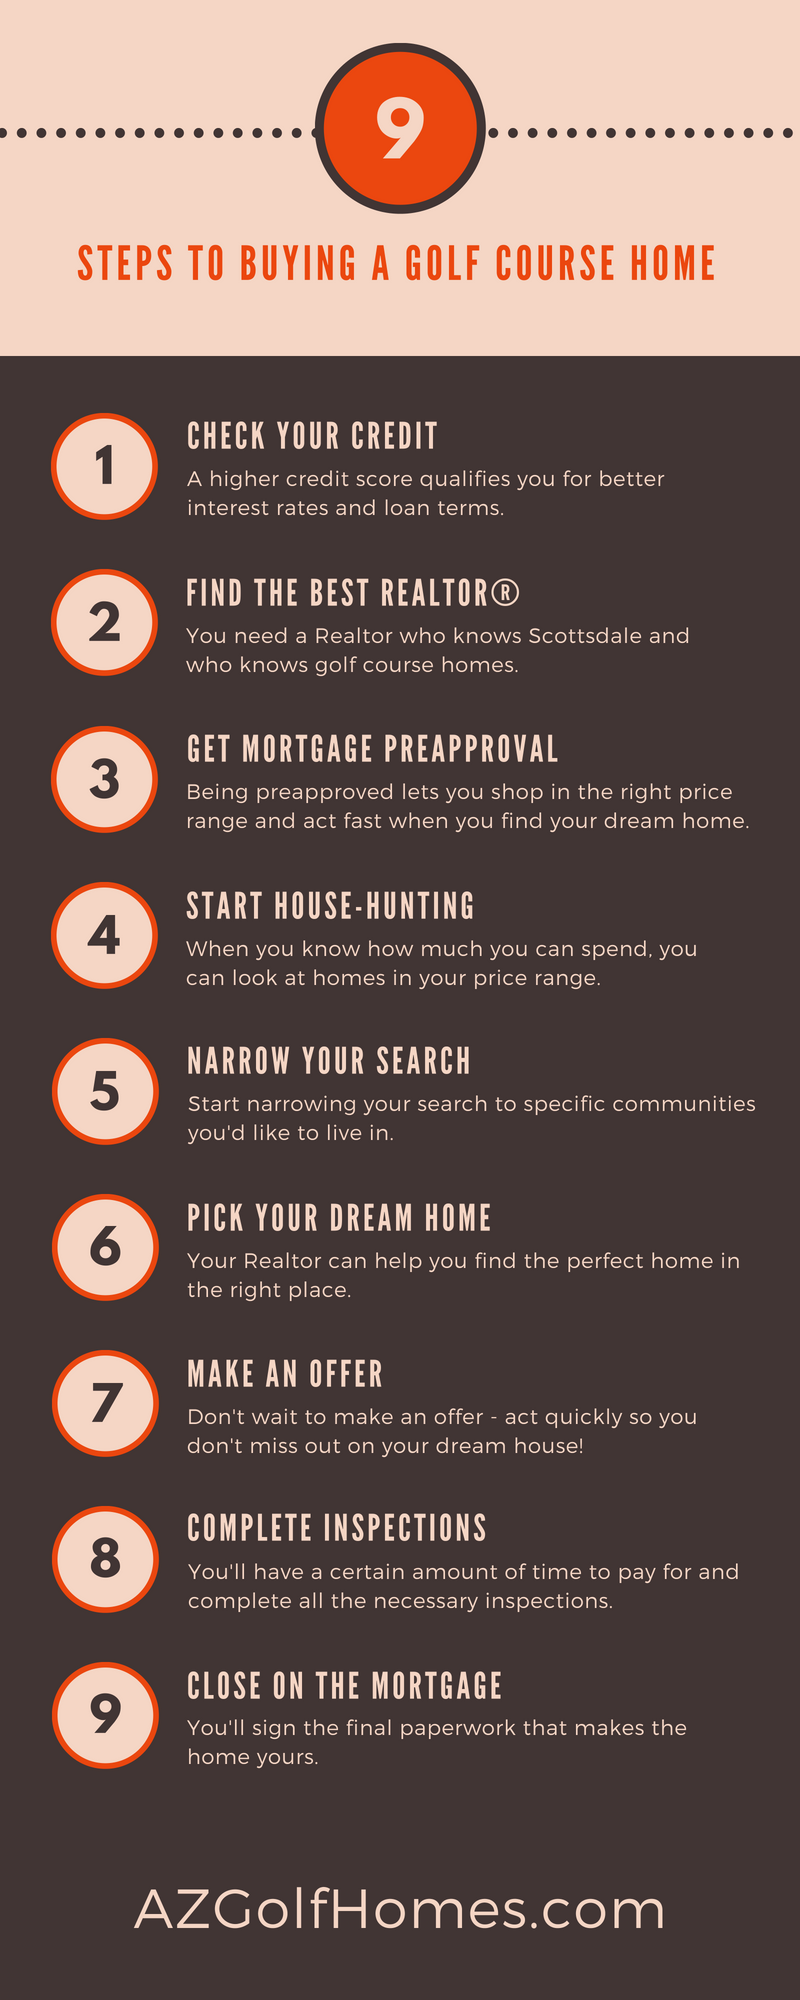 9 Steps to Buying a Golf Course Home 